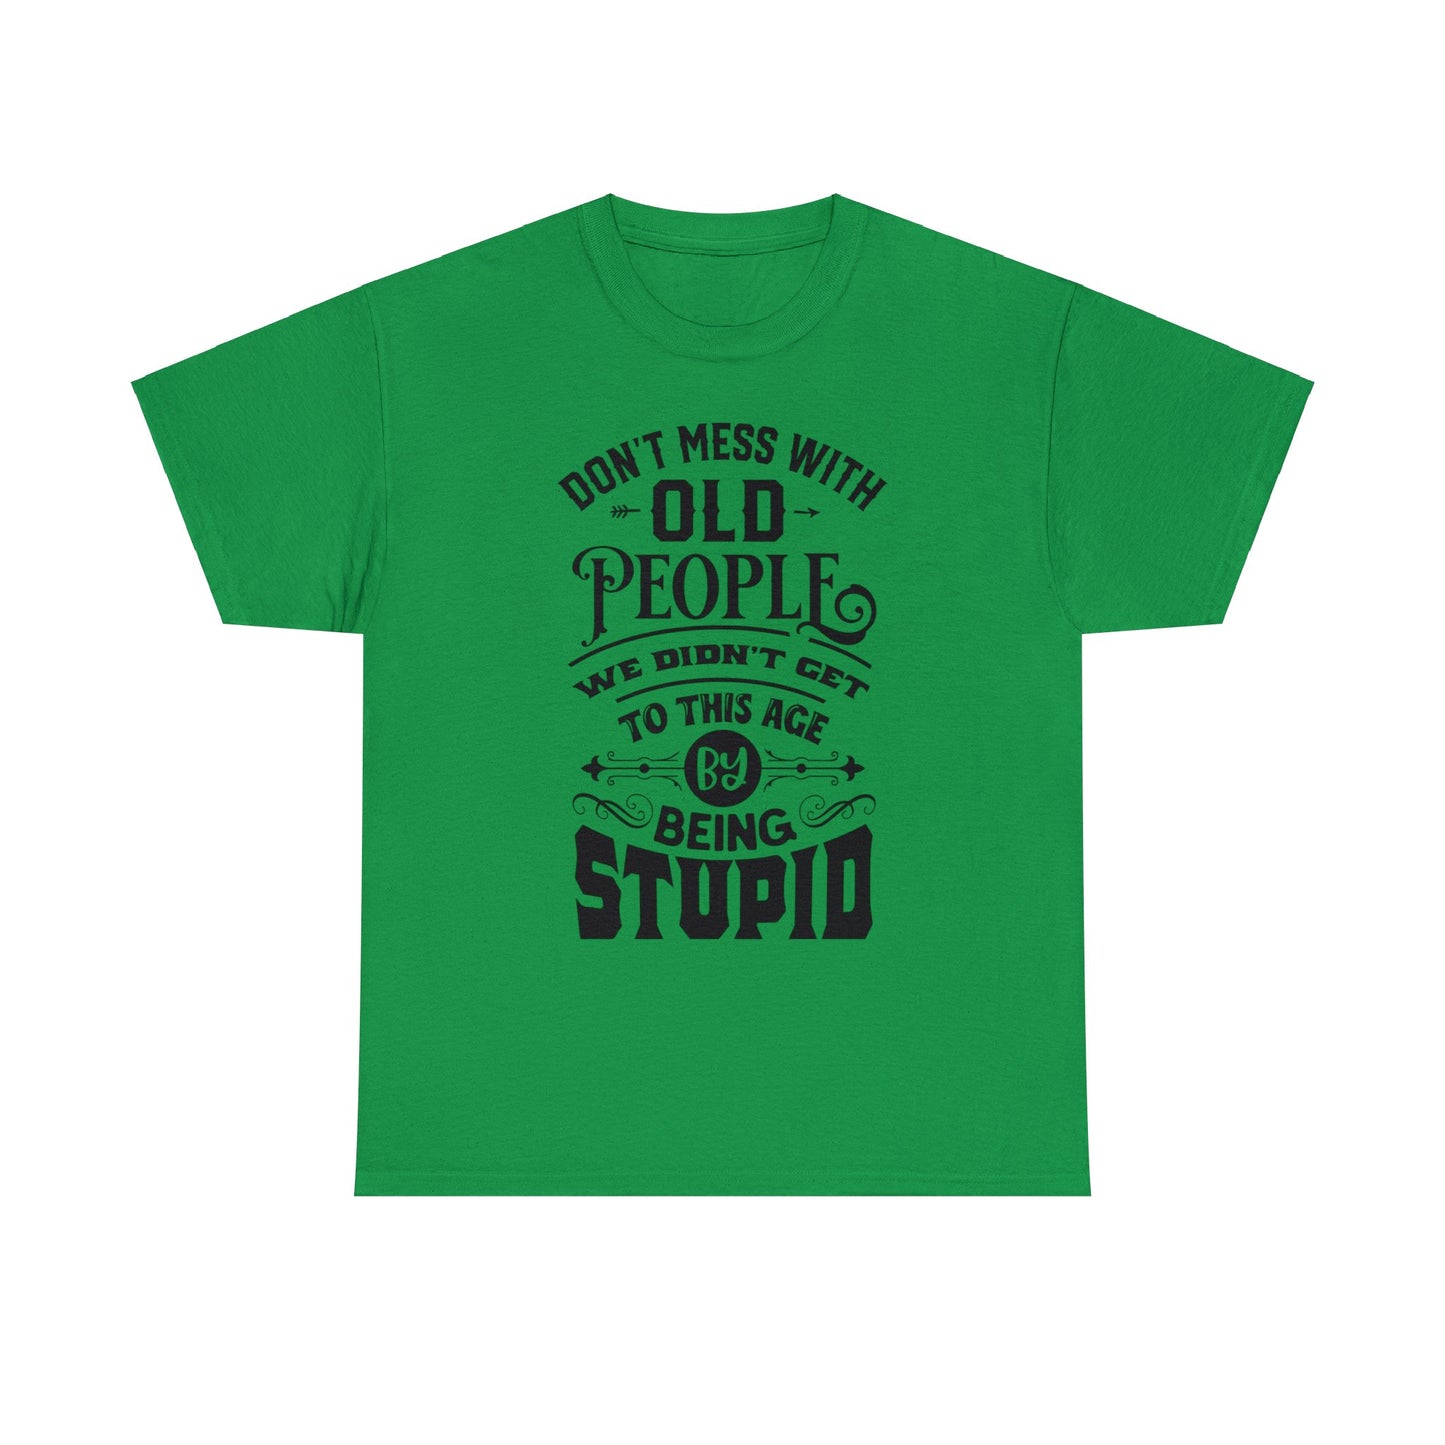 Old People T-Shirt For Funny Aging T Shirt For Getting Older TShirt For Birthday Gift